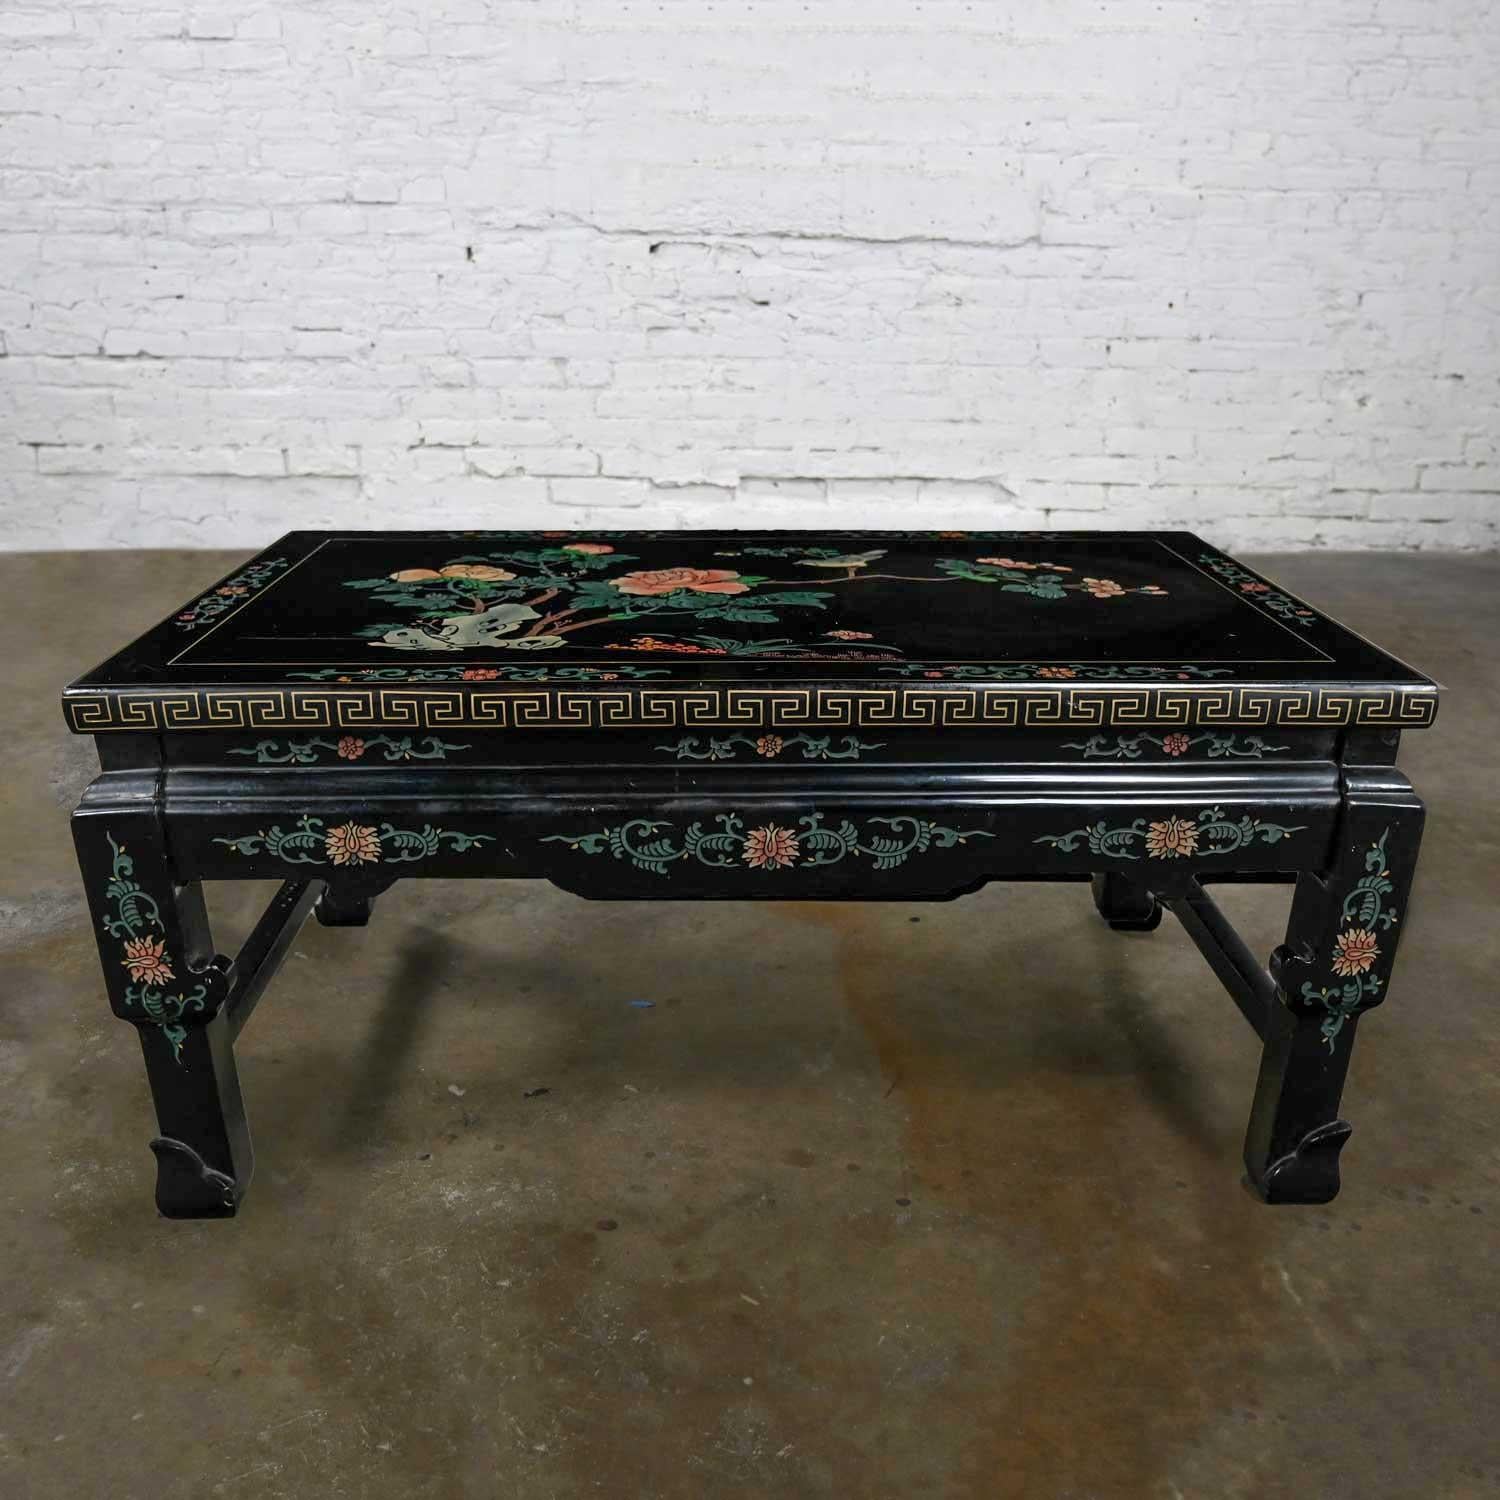 Stunning vintage chinoiserie Asian folding coffee table black lacquered with carved gold meander or Greek key & floral designs and modified Ming chow feet and the skirts and legs fold in. Beautiful condition, keeping in mind that this is vintage and